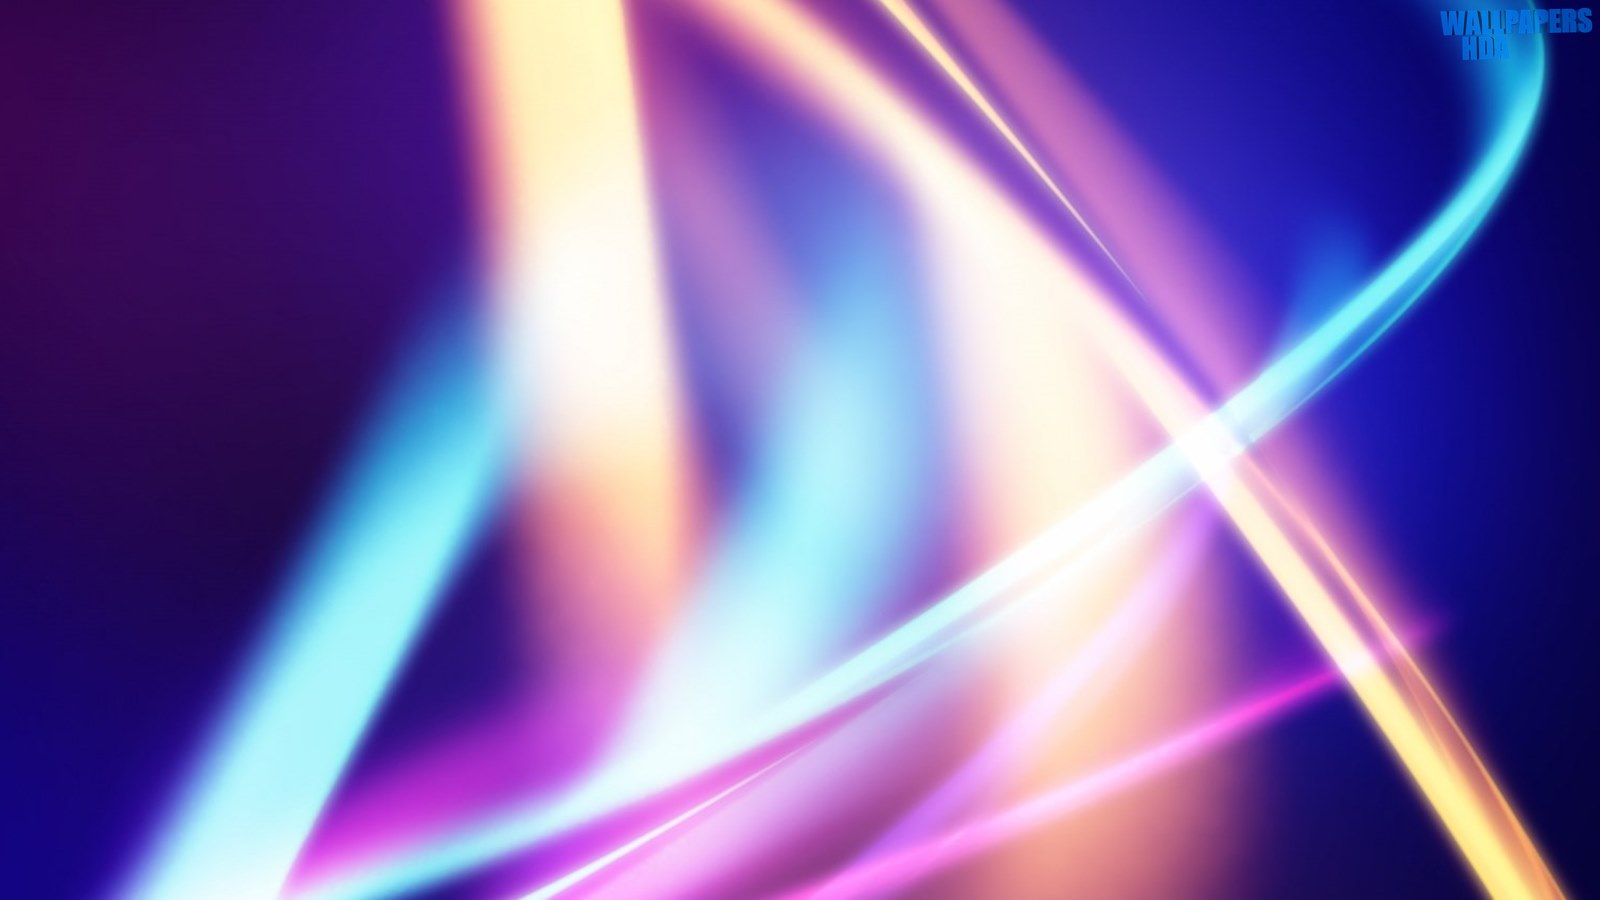 Abstract graphic design colorful wallpaper 1600x900